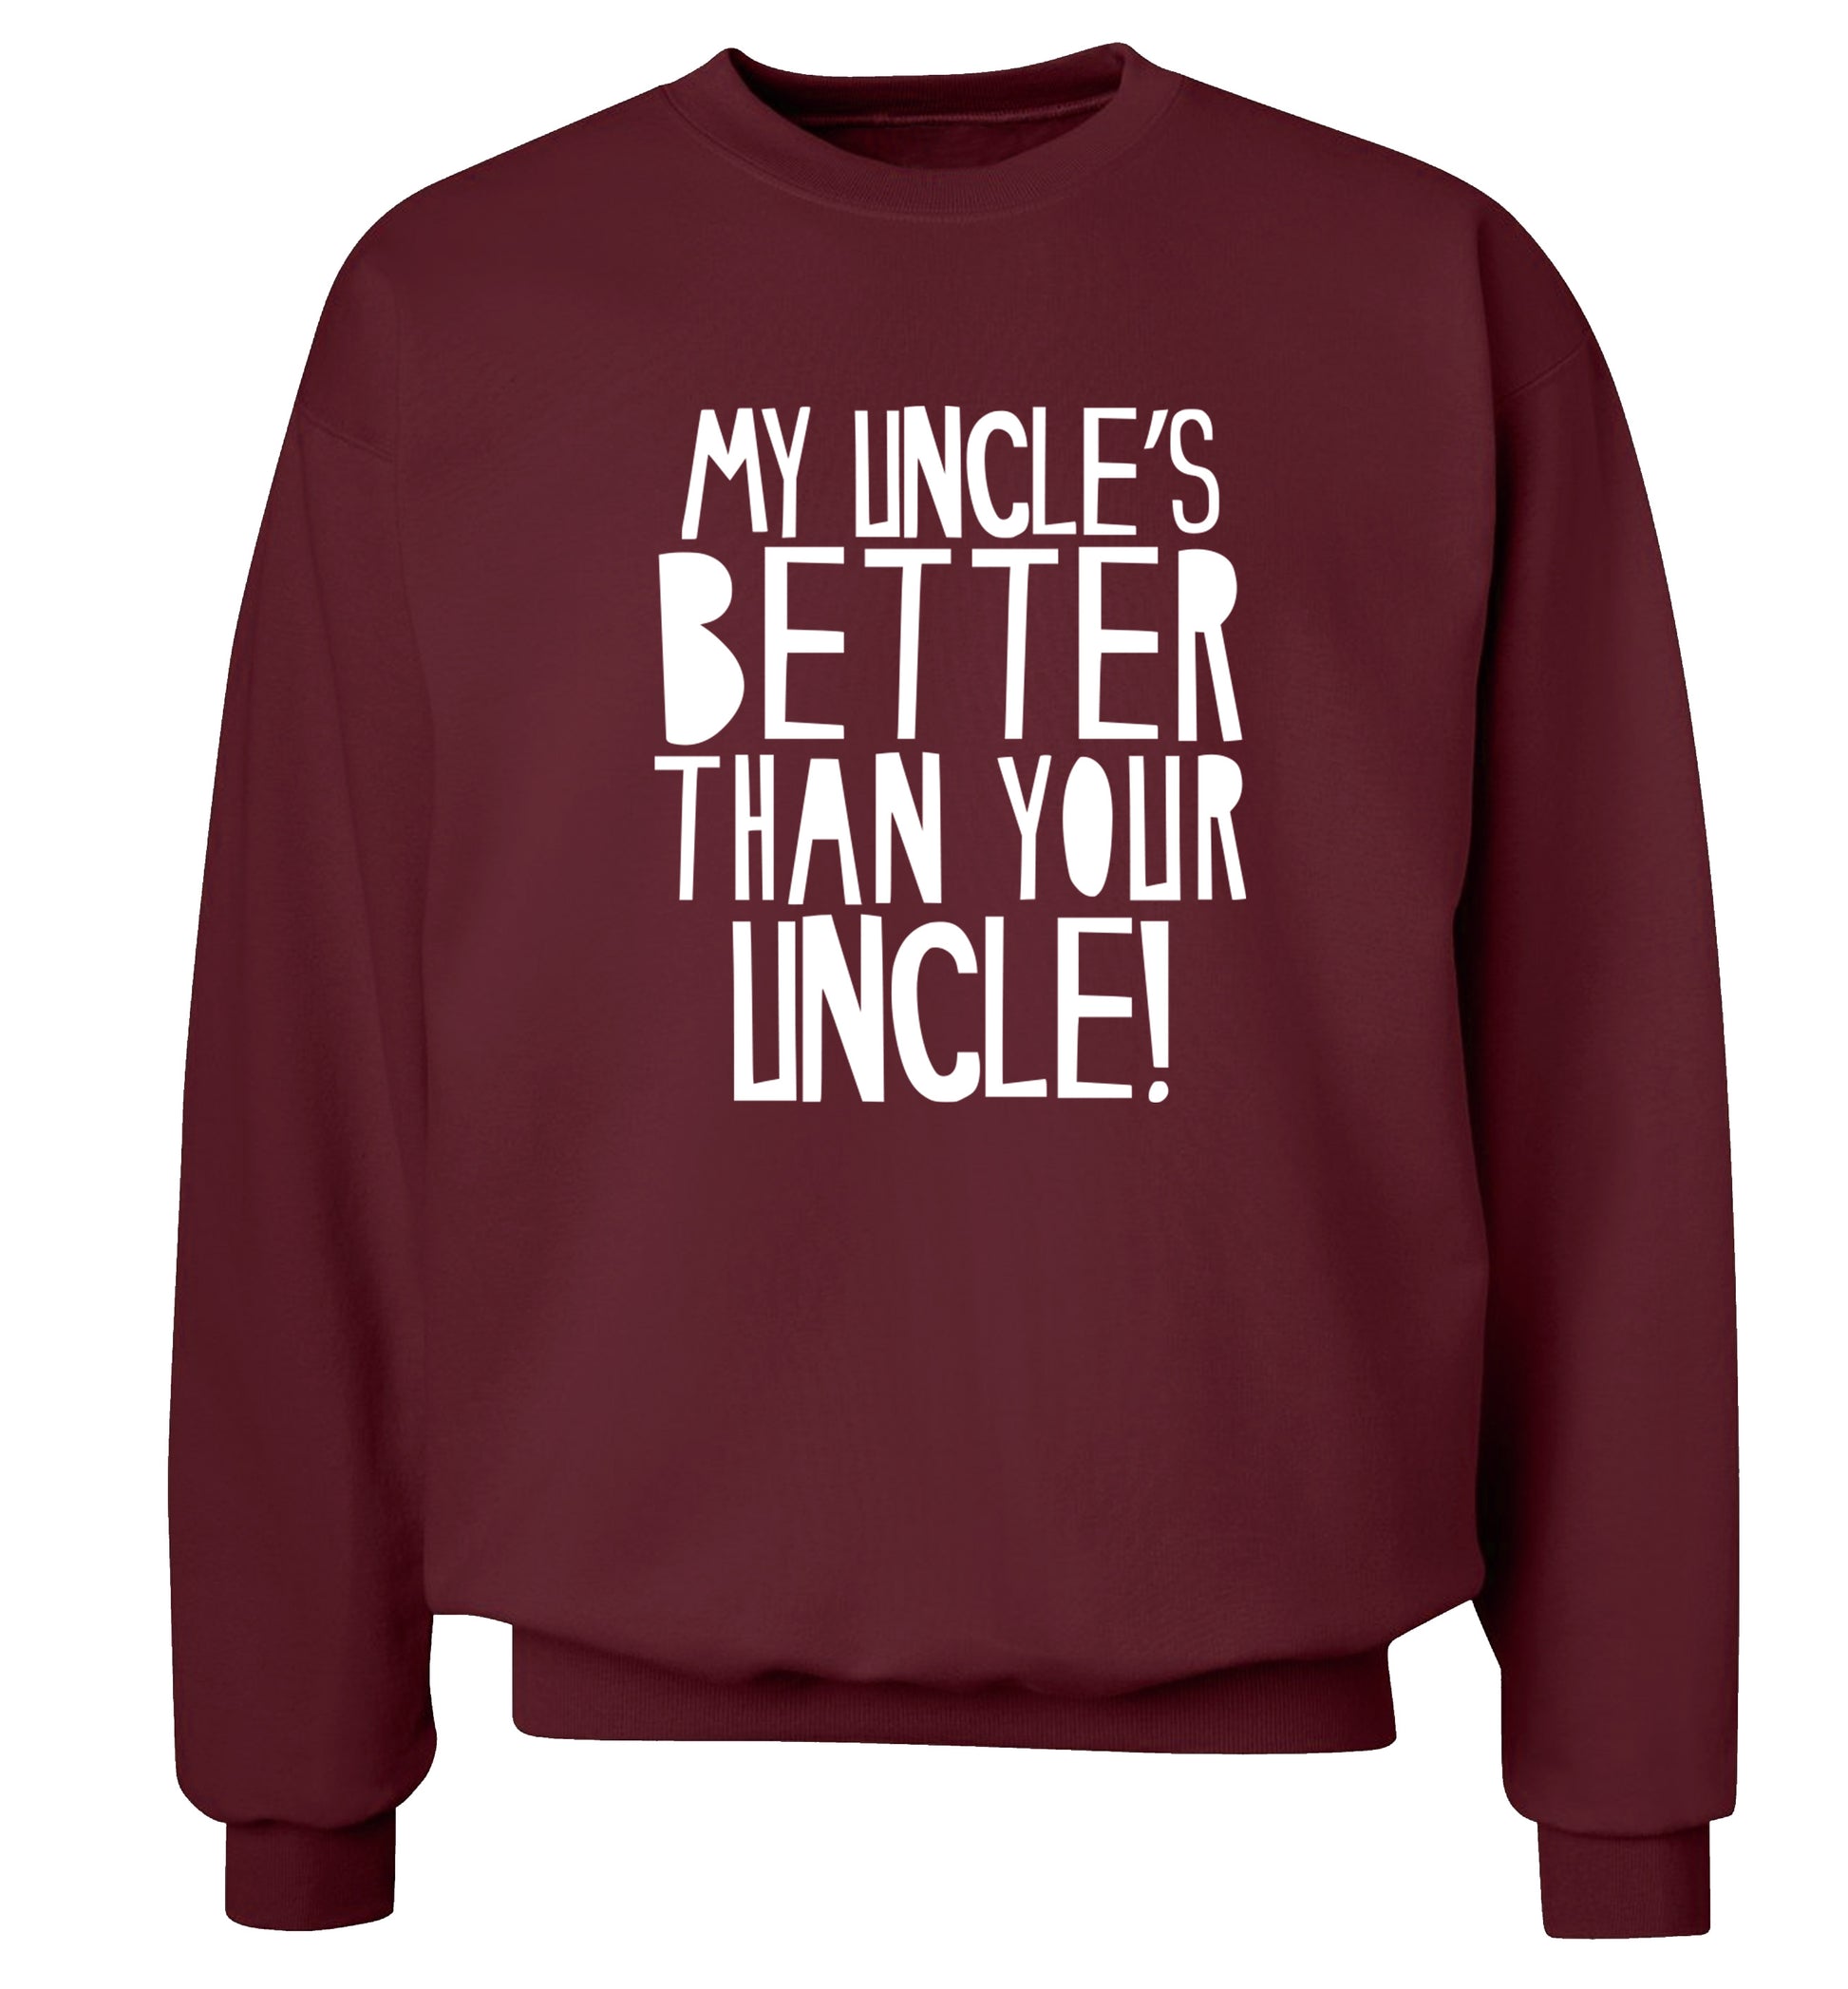 My uncles better than your uncle Adult's unisex maroon Sweater 2XL